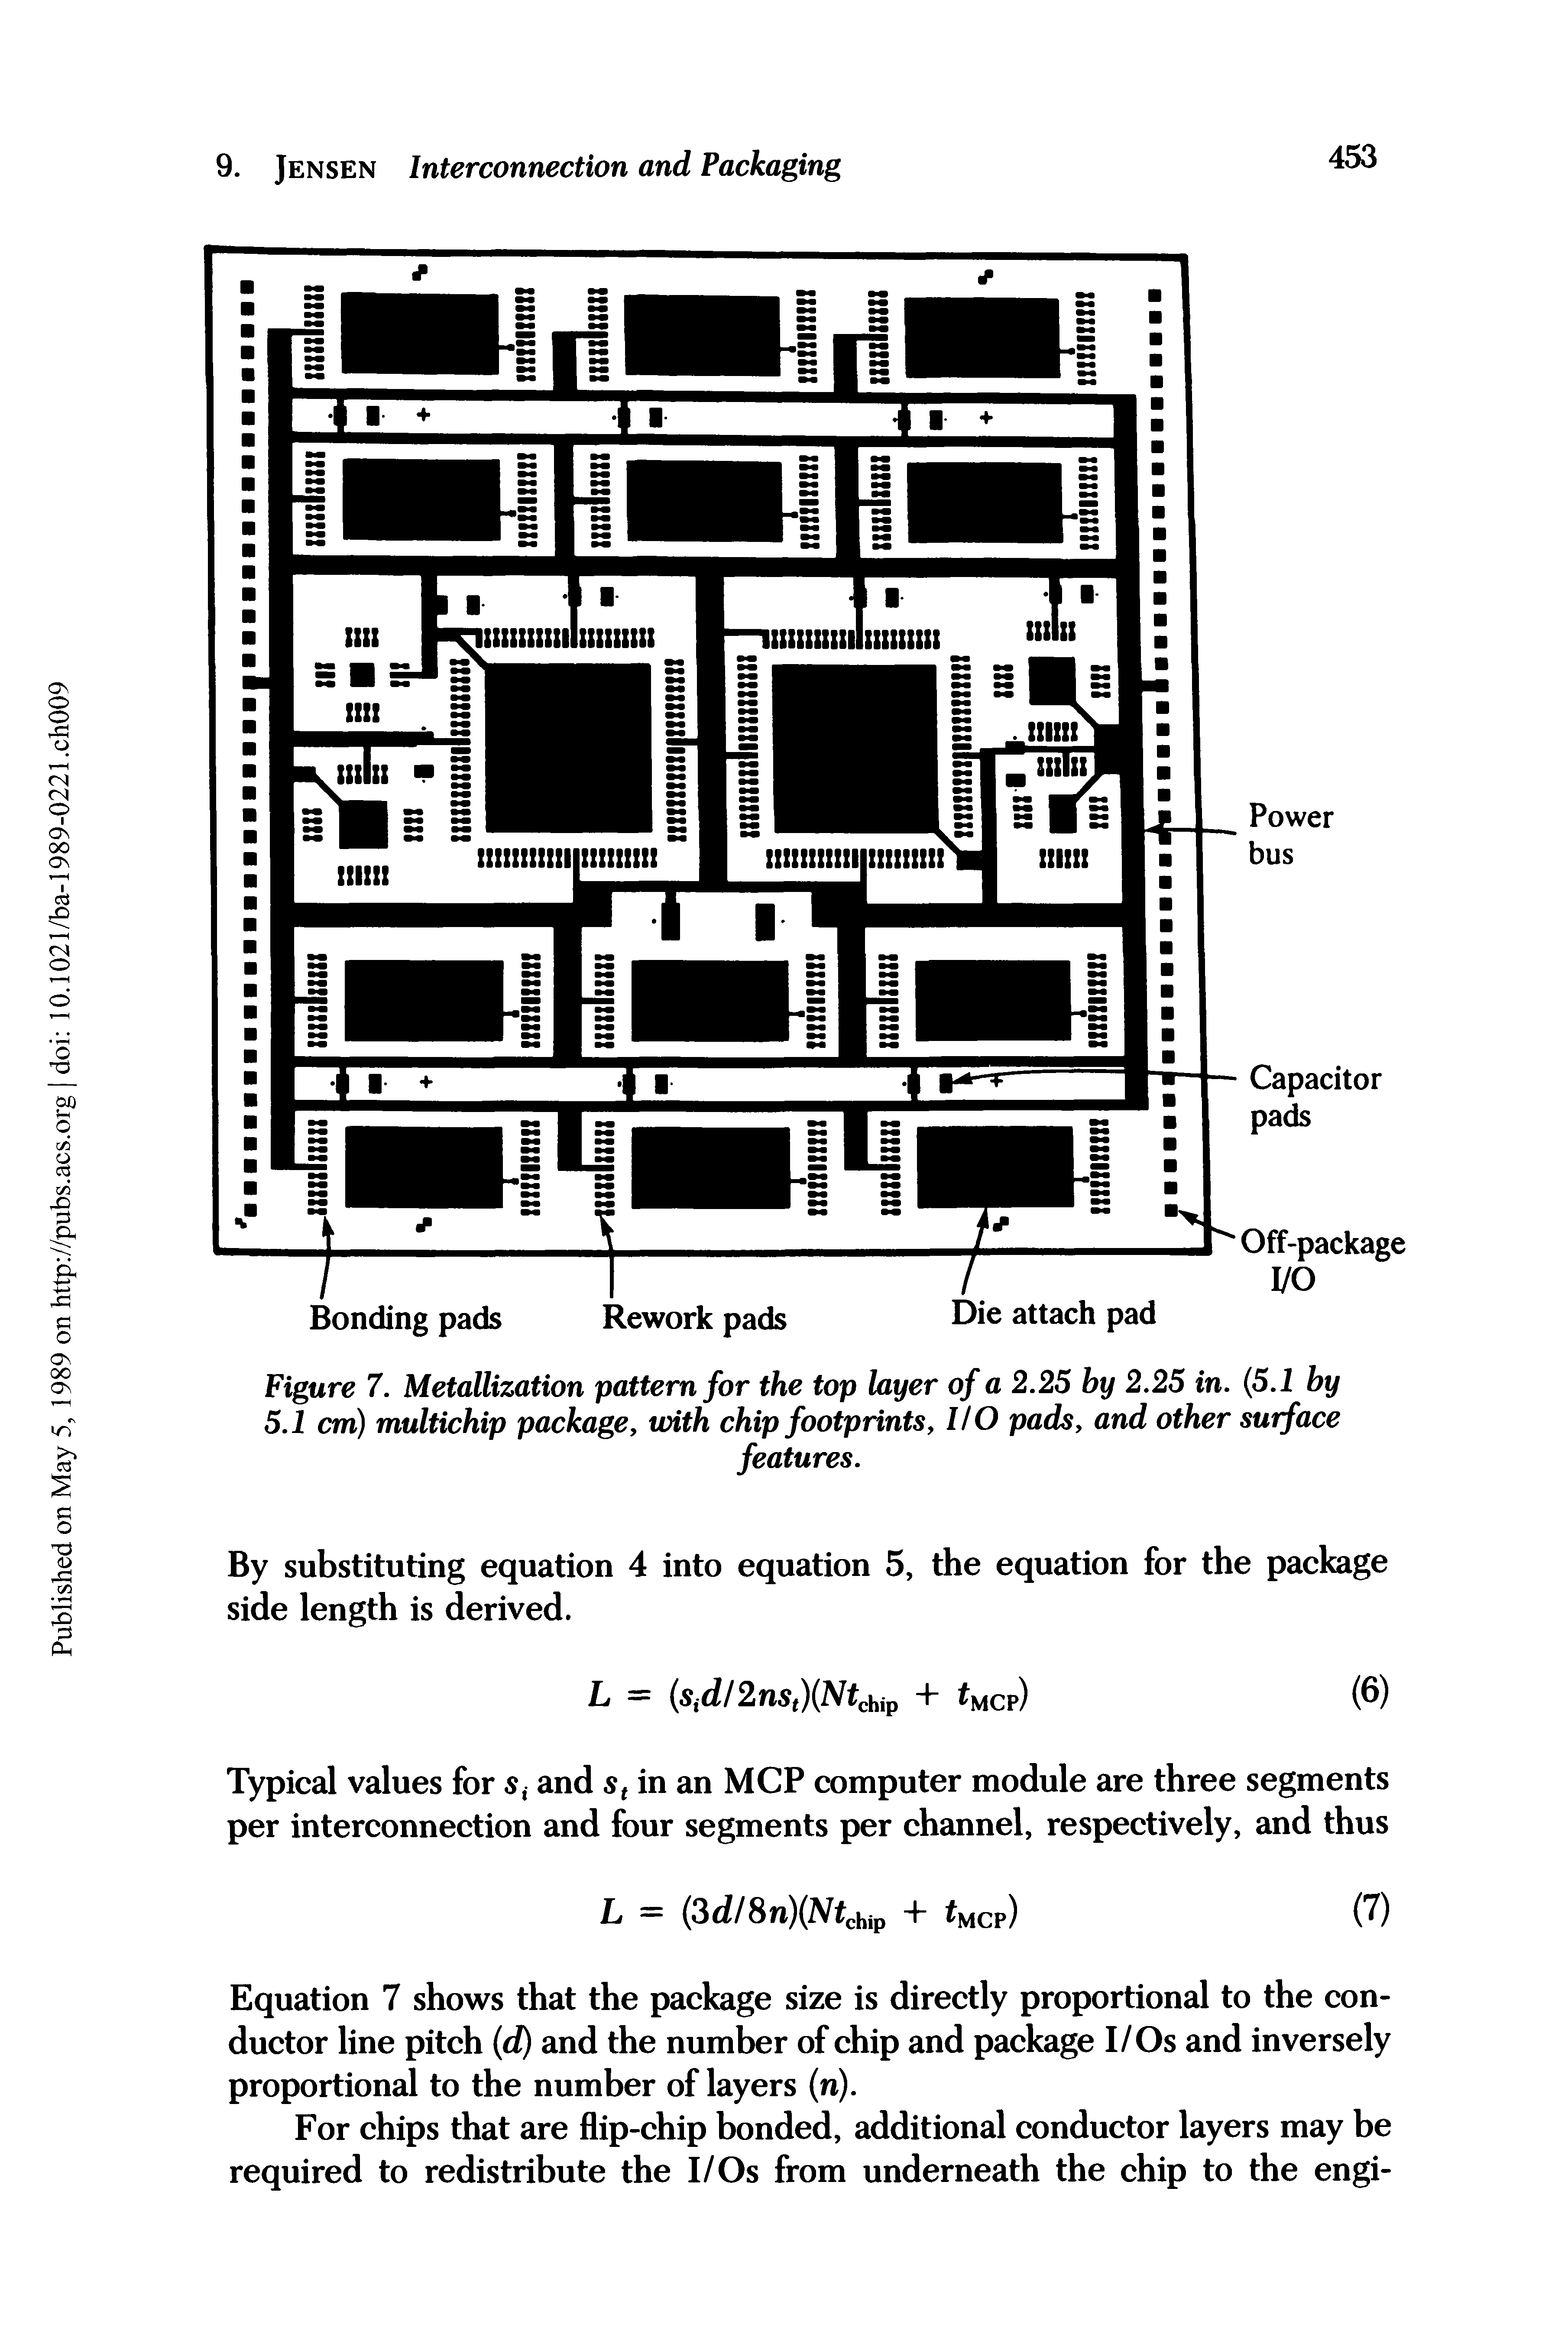 Figure 7. Metallization pattern for the top layer of a 2.25 by 2.25 in. (5.1 by 5.1 cm) multichip package, with chip footprints, I/O pads, and other surface...